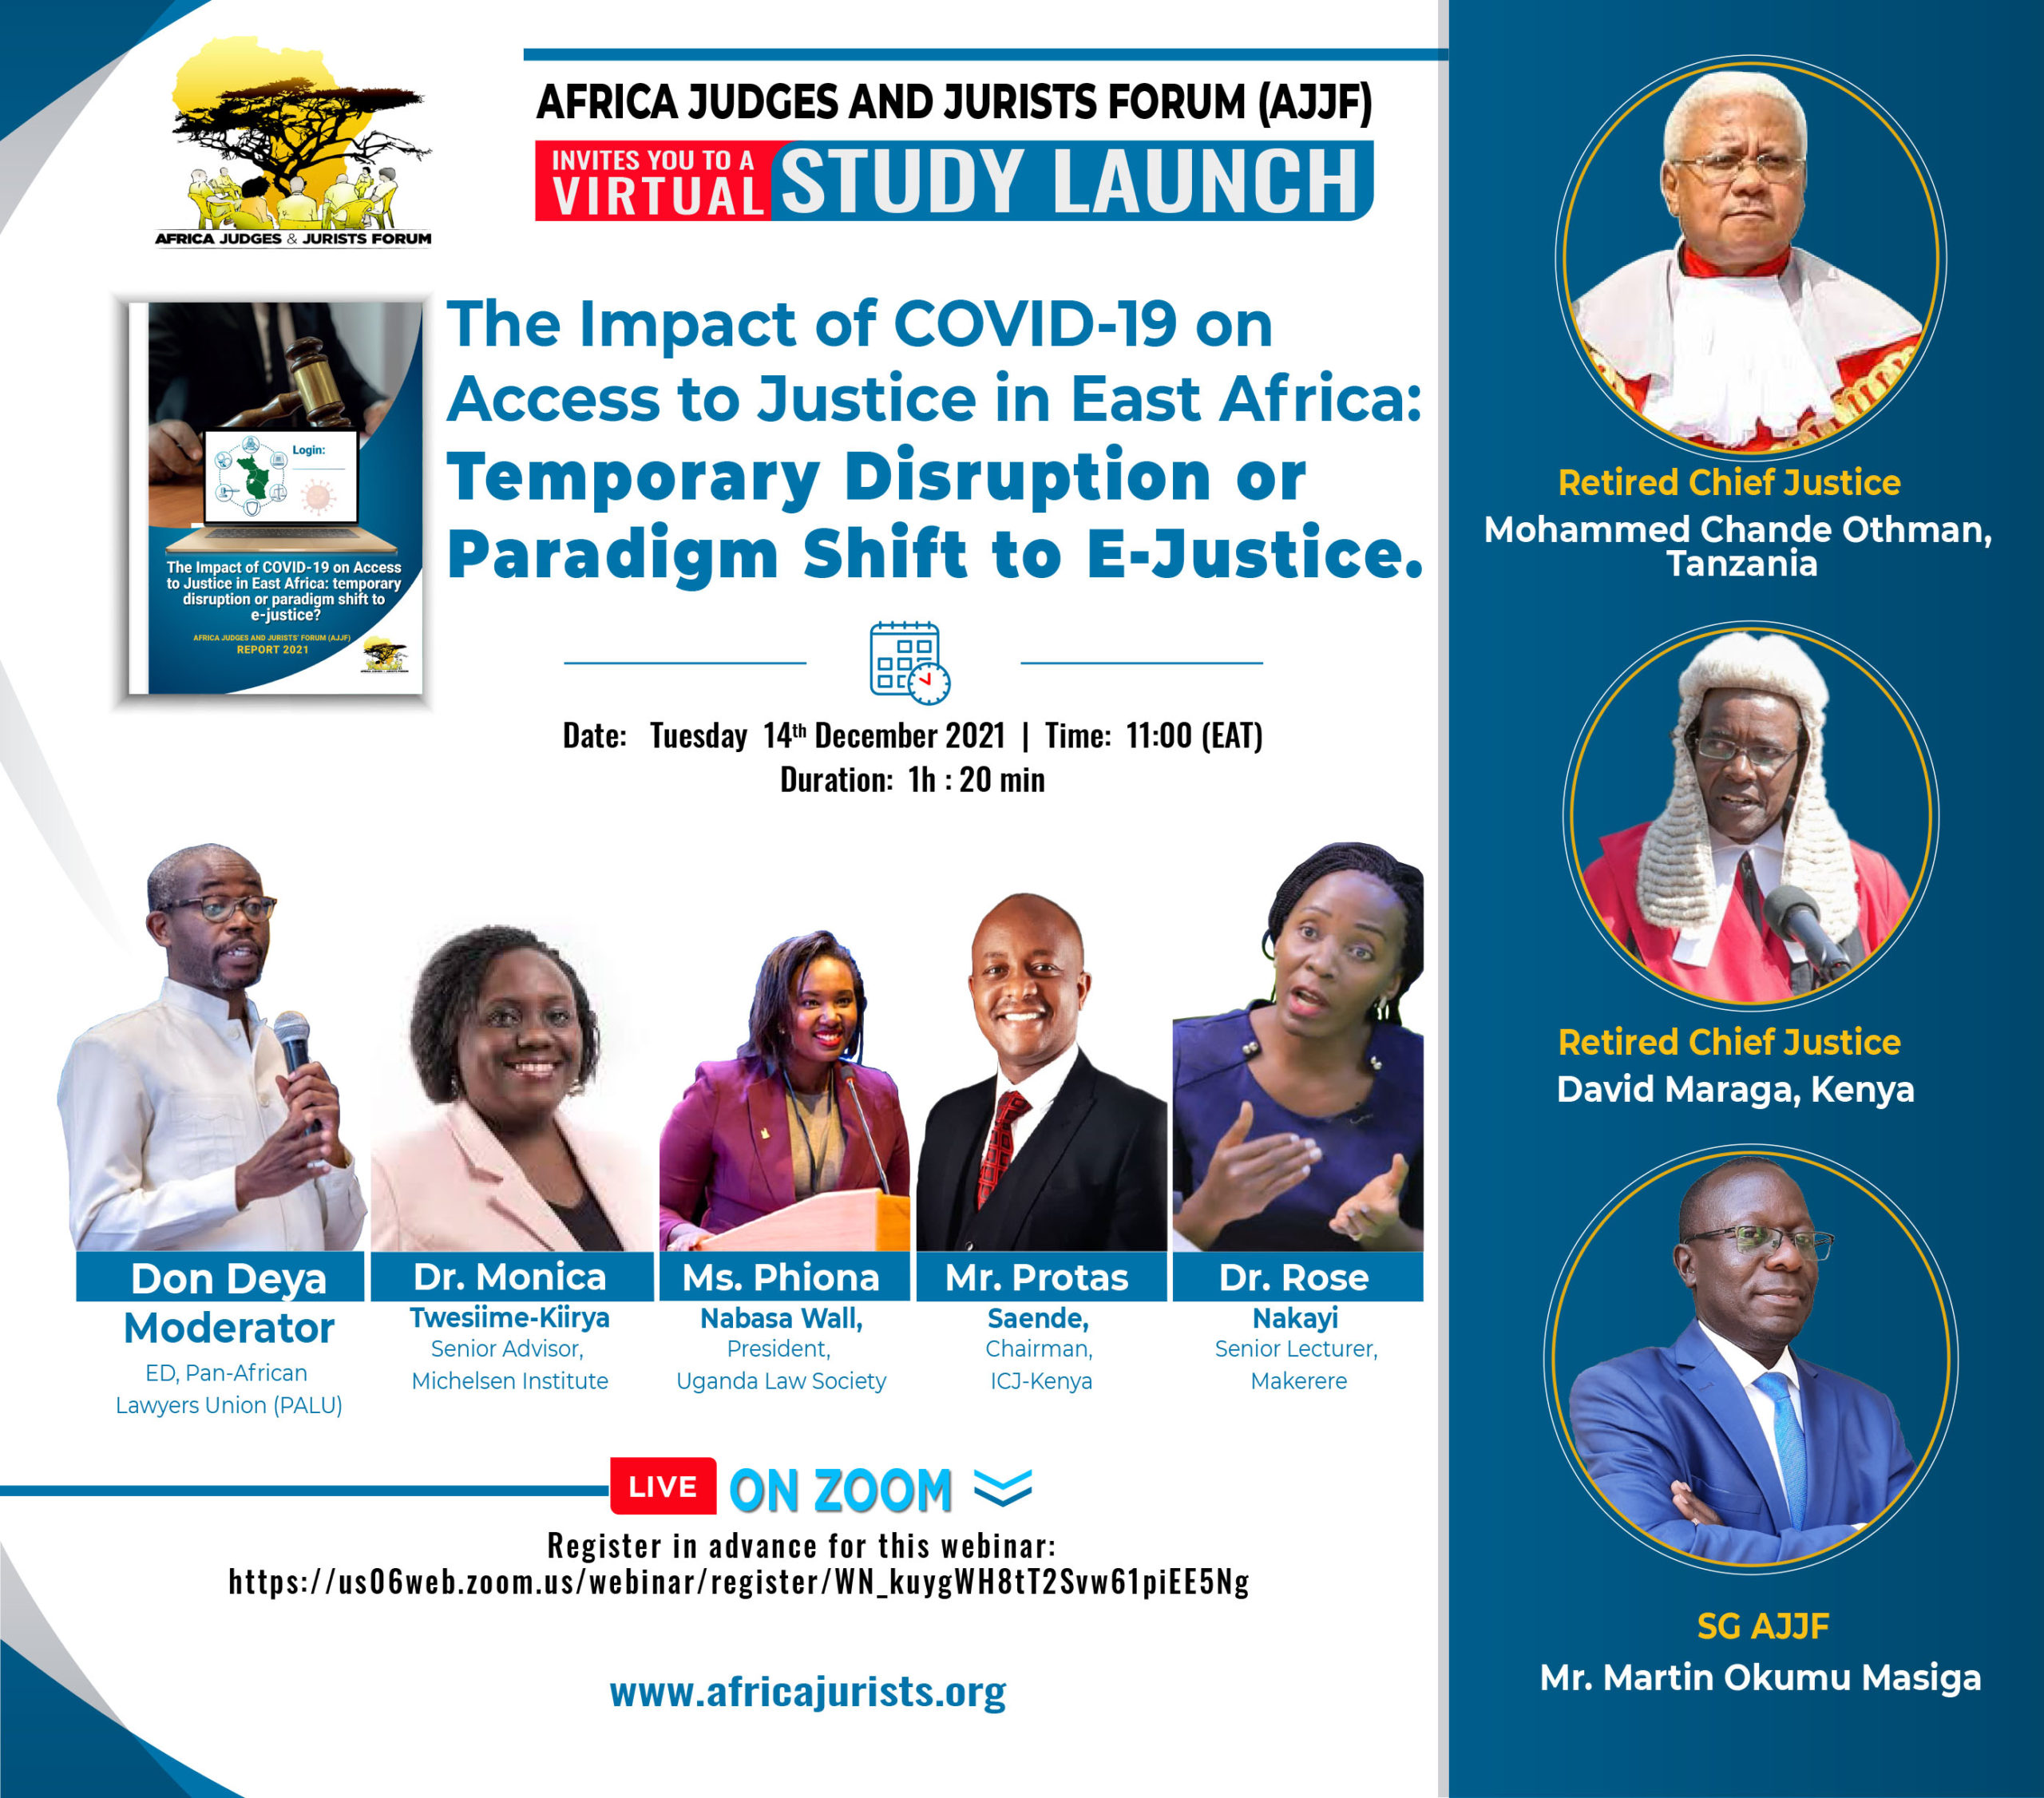 Virtual Study Launch; The Impact of Covid-19 on Access to Justice in East Africa.